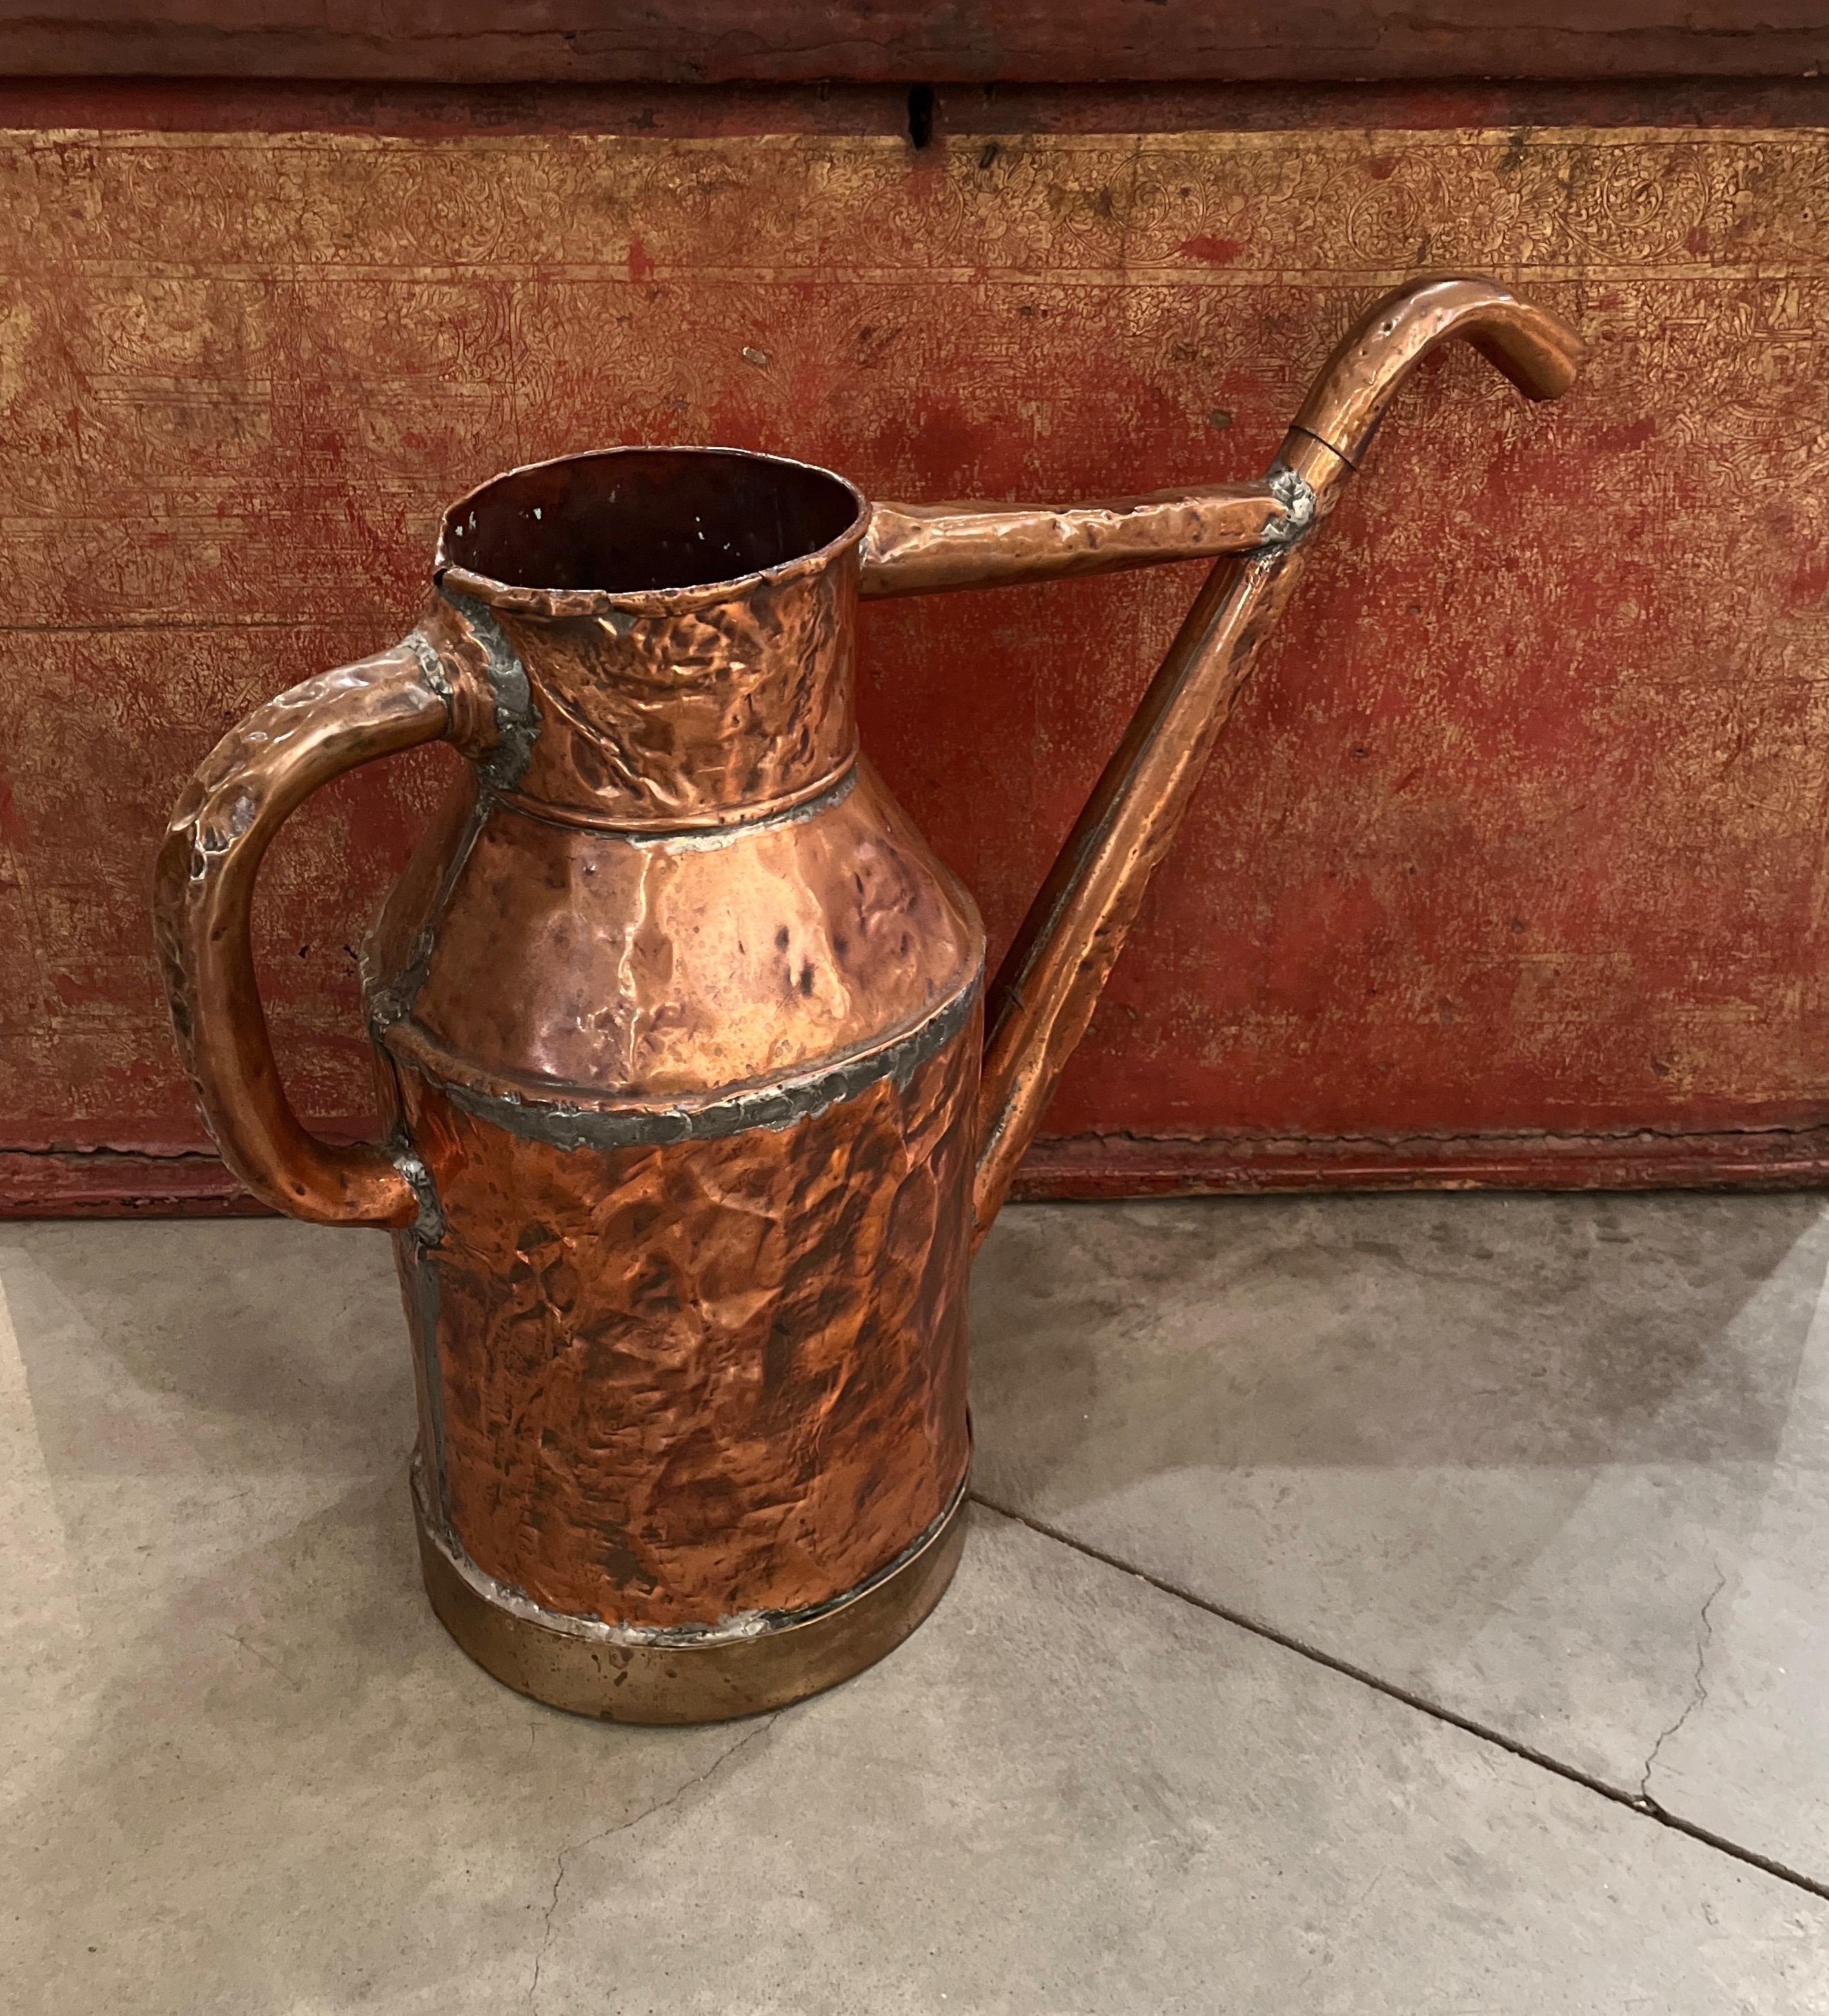 A quite large,  rarely seen hand forged copper oil pitcher, unusual in size and form.  Every small ding and dent speaks to it's frequent use over many decades.  It's evident handmade construction, distinctive patina  and remarkable scale would  make